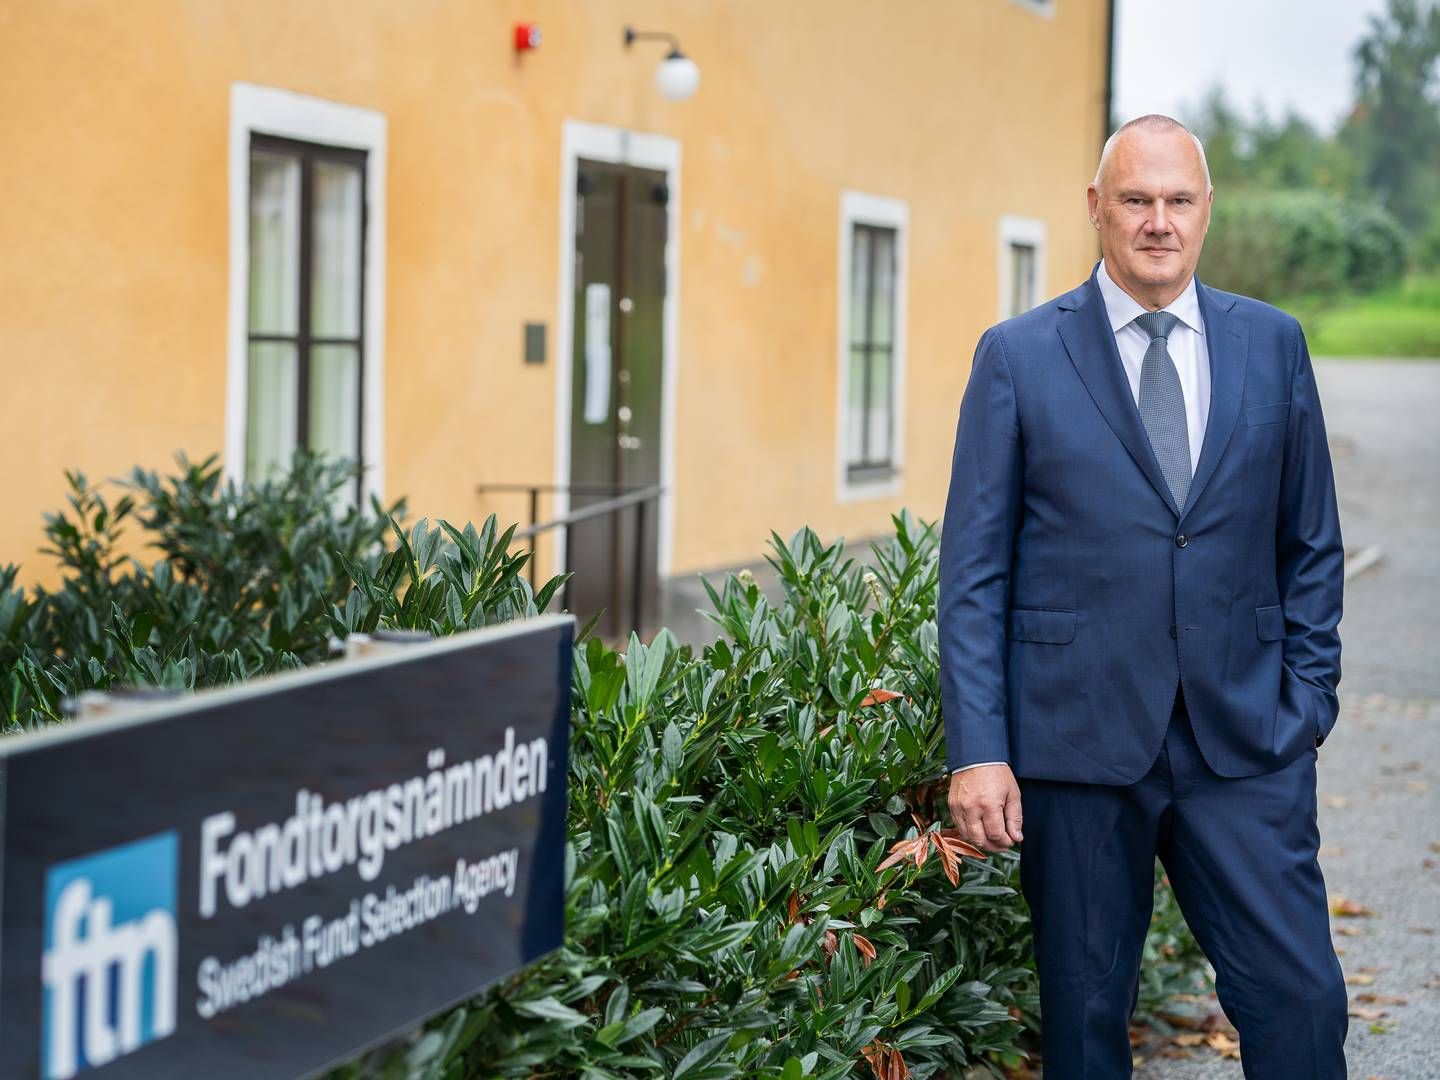 The executive director of FTN, Erik Fransson, says that "our aim is to improve the fund offering for pension savers as quickly as possible." | Photo: Fondtorgsnämnden / PR